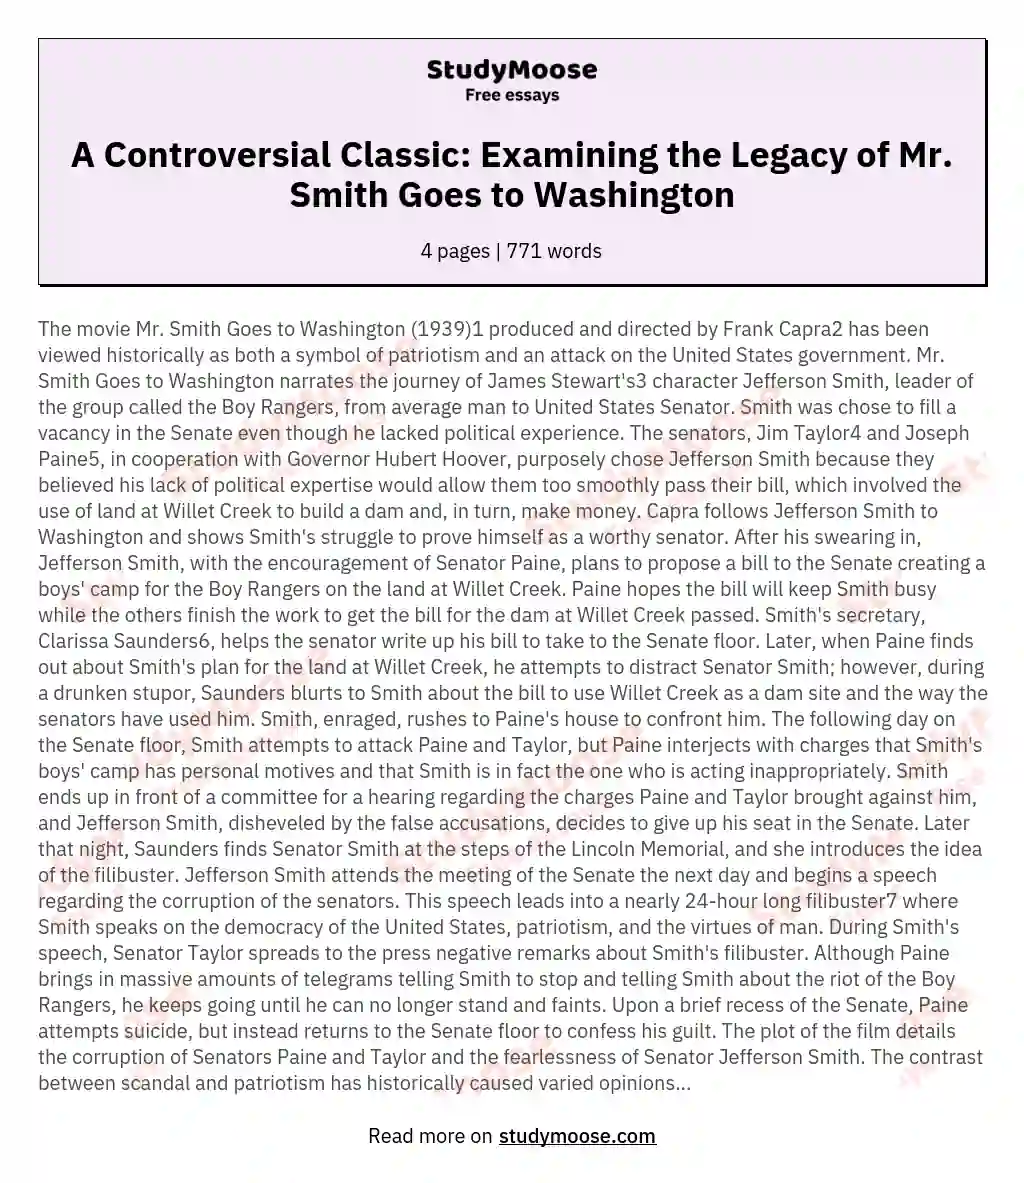 A Controversial Classic: Examining the Legacy of Mr. Smith Goes to Washington essay